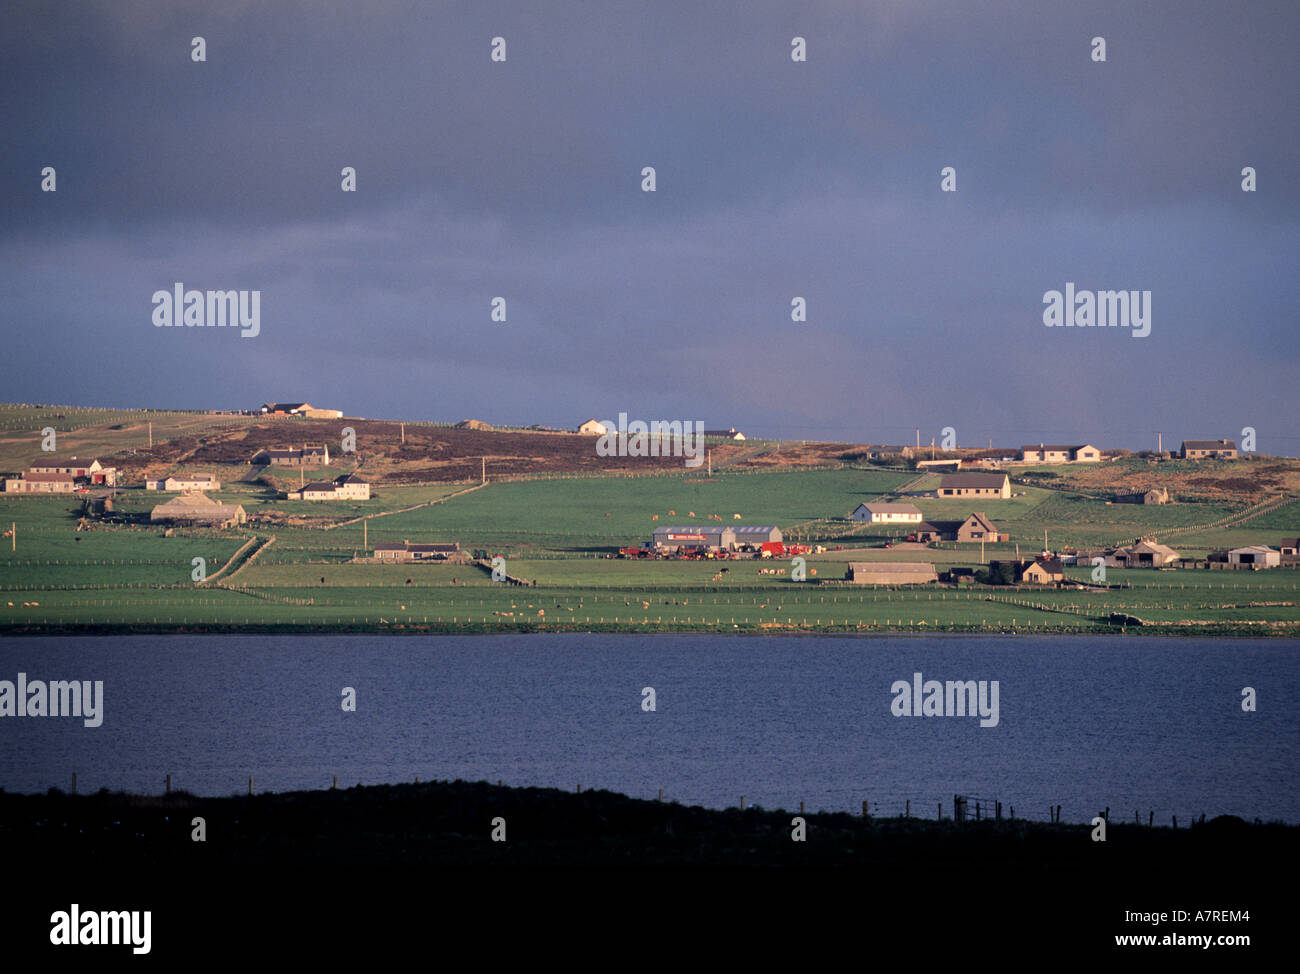 United Kingdom, Scotland, Orkney Islands, Mainland, the Loch of Stenness Stock Photo